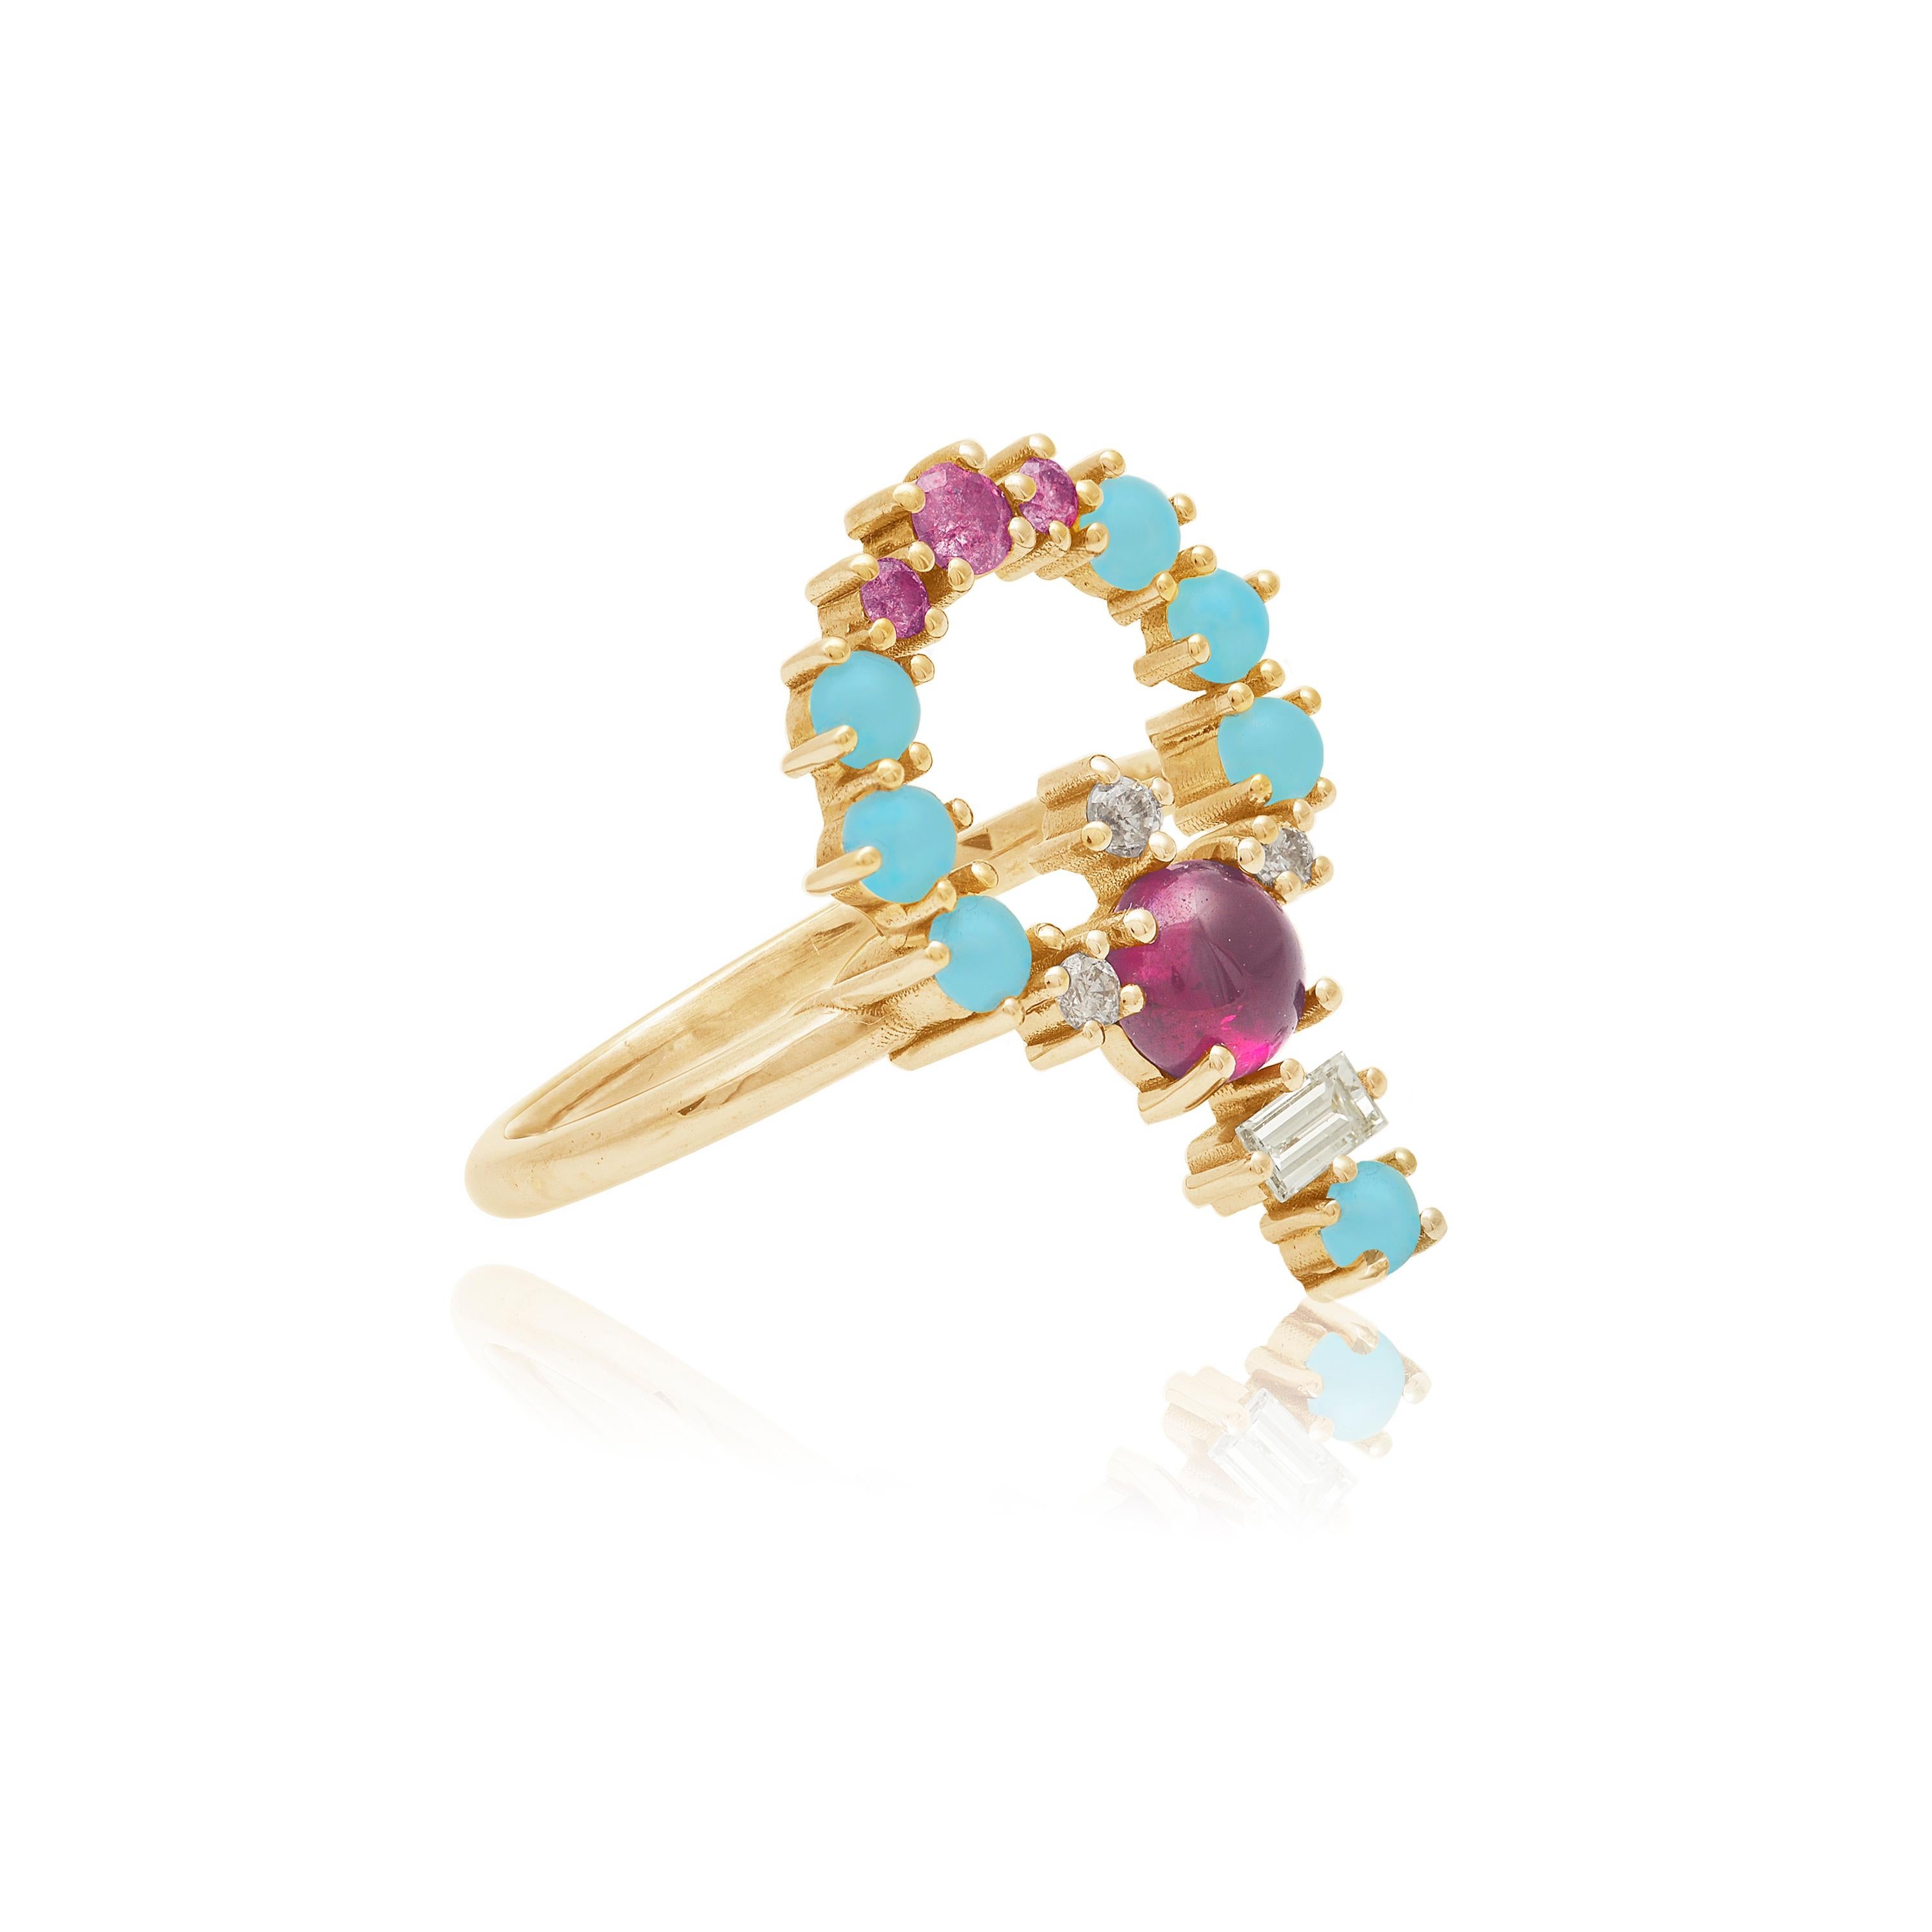 Designer: Alexia Gryllaki
Dimensions: L20x20mm
Ring Size UK M 1/2, US 6 1/2
Weight: approximately 3.1g  
Barcode: OFS048

Multi-stone ring in 18 karat yellow gold with a round cabochon fuchsia tourmaline approx. 0.40cts, round faceted pink sapphires